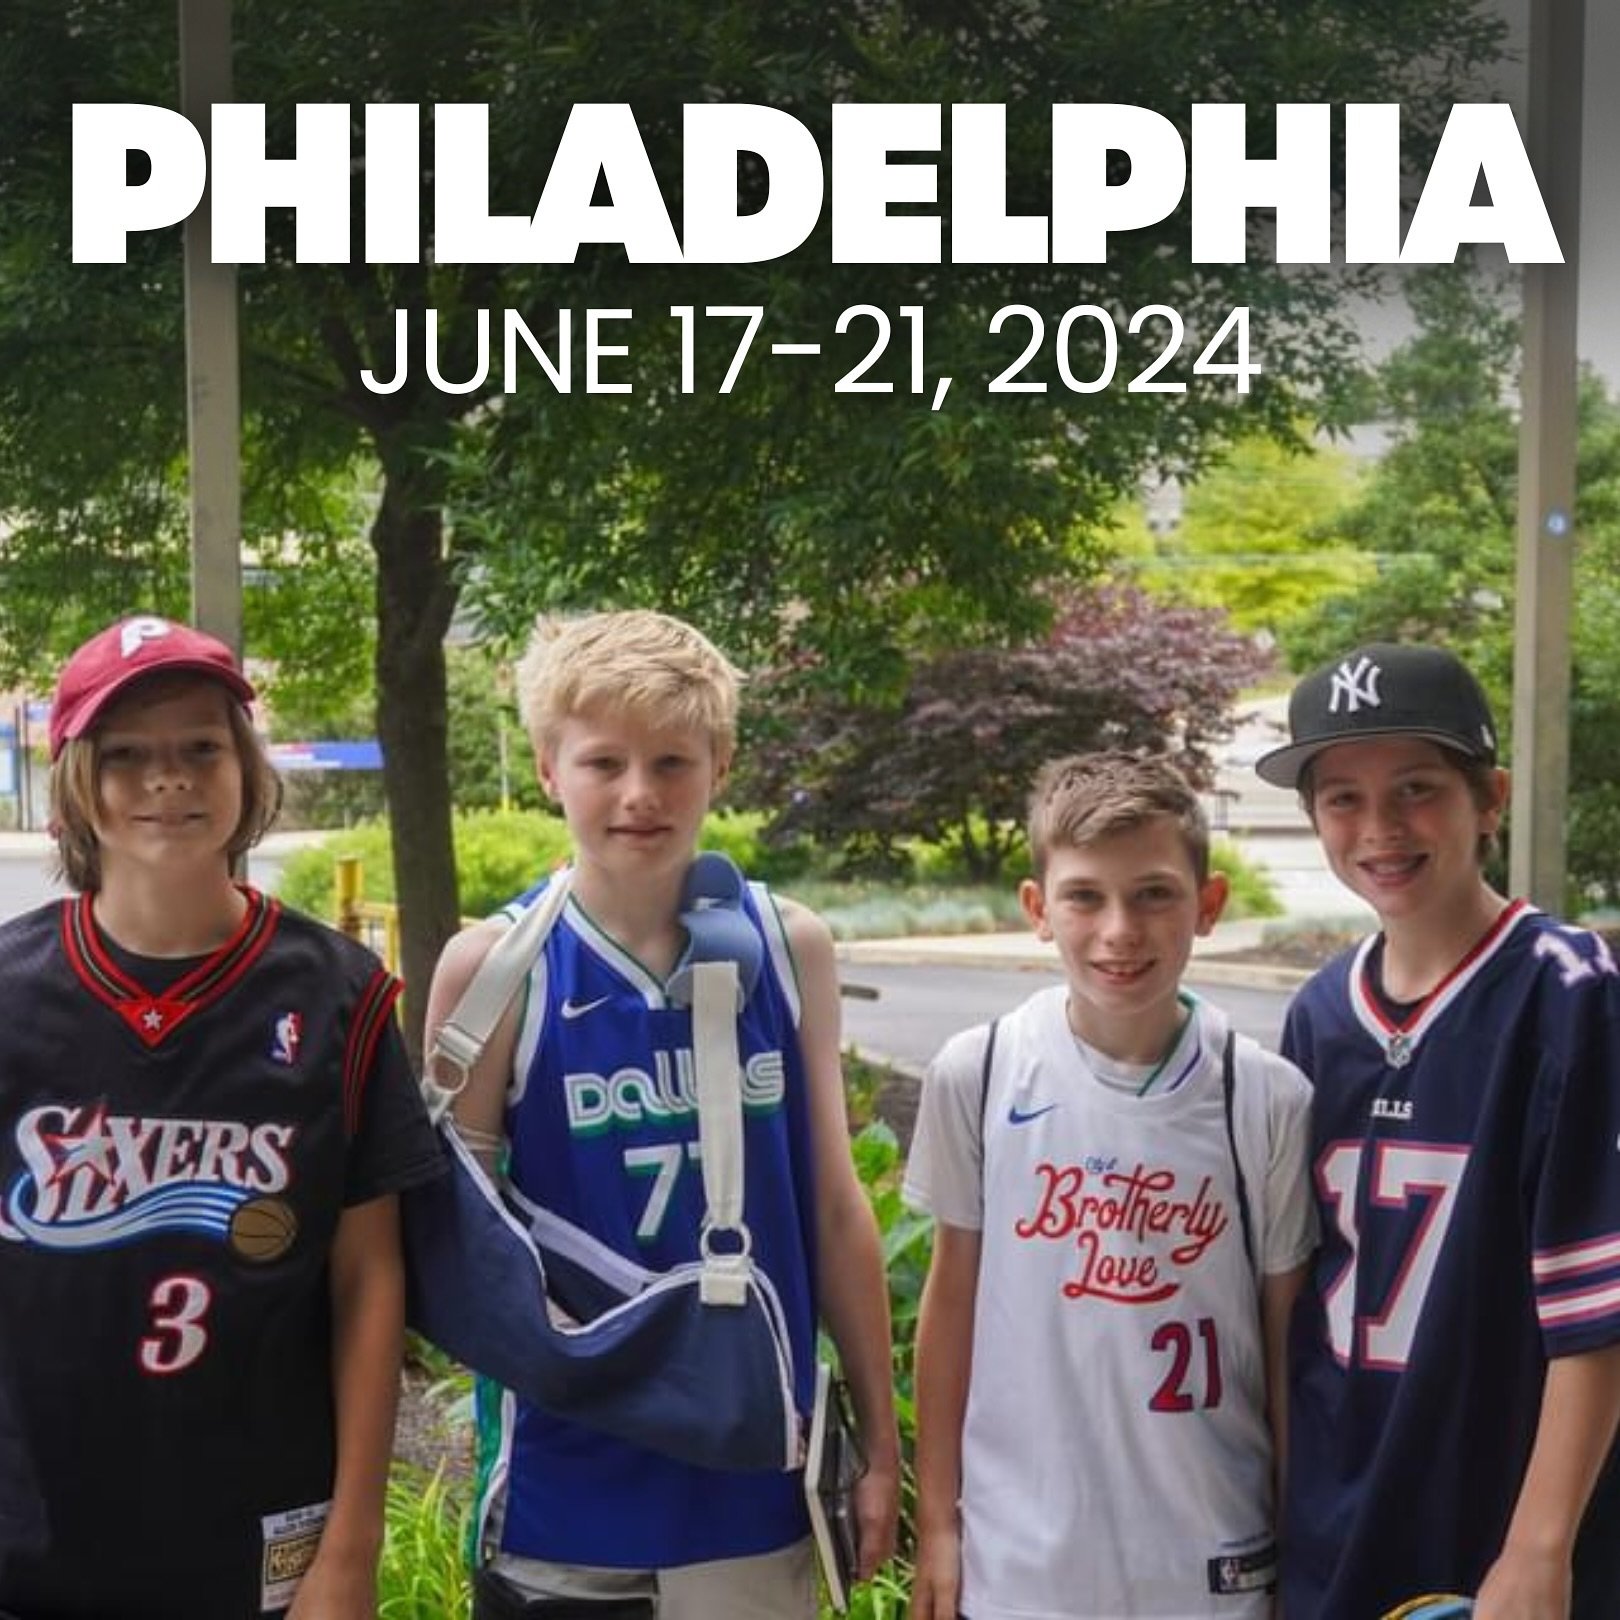 Where it all began&hellip;PHILADELPHIA, PA!

Join us June 17-21, 2024 at Villanova University for day or overnight #sportsbroadcasting camp. Learn all aspects of sports broadcasting, host your own shows on-camera, meet top sports broadcasters and ath